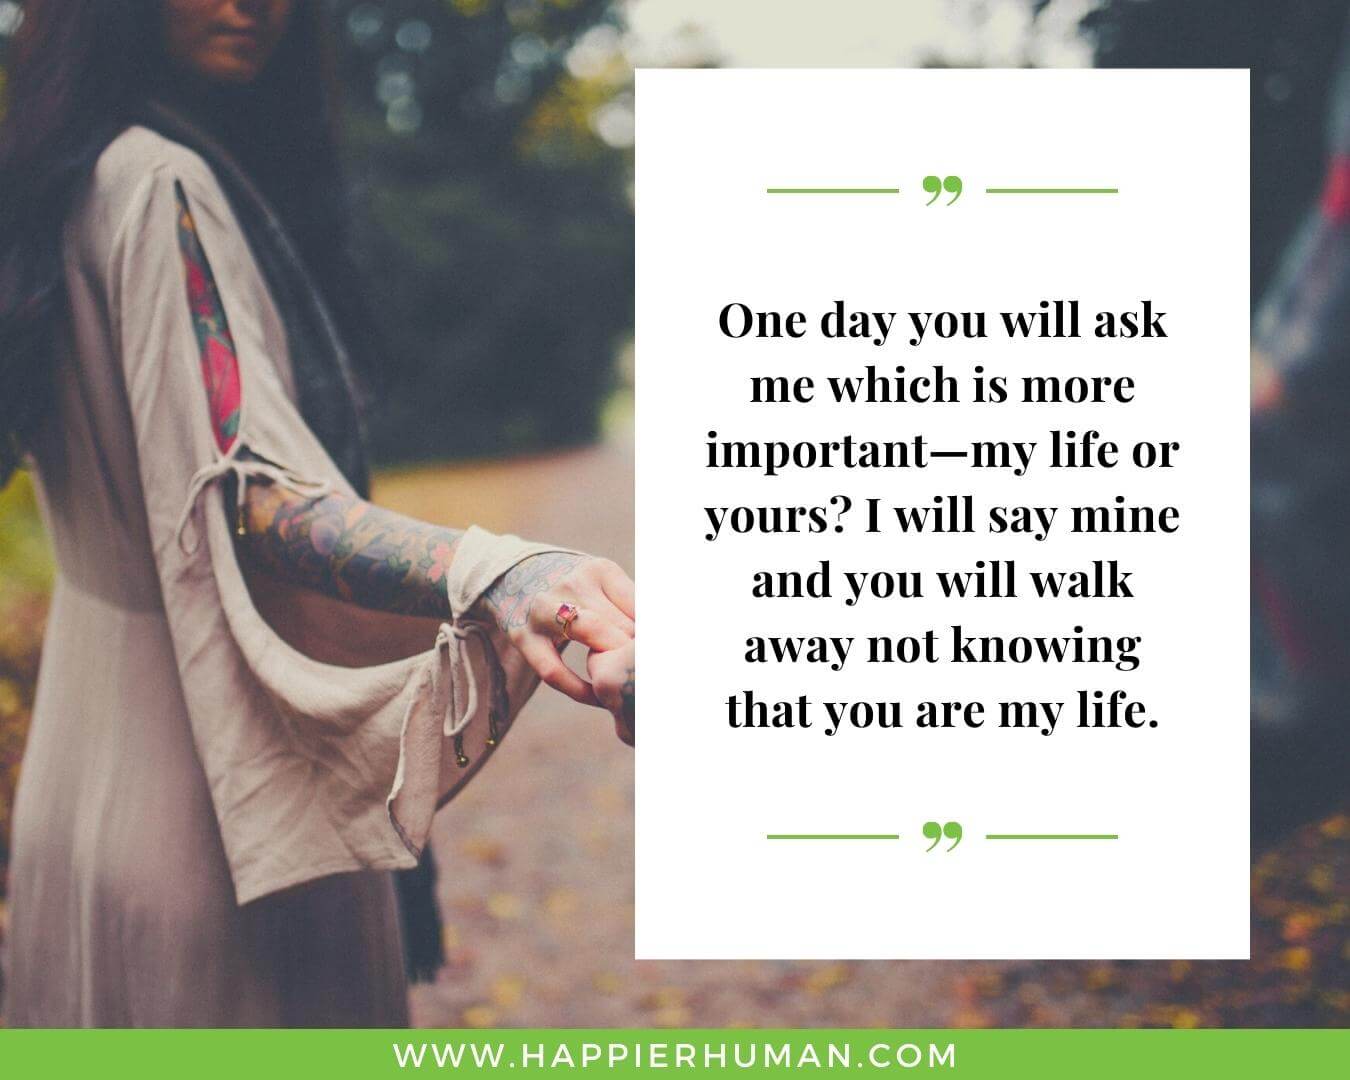 Unconditional Love Quotes for Her - “One day you will ask me which is more important—my life or yours? I will say mine and you will walk away not knowing that you are my life.”